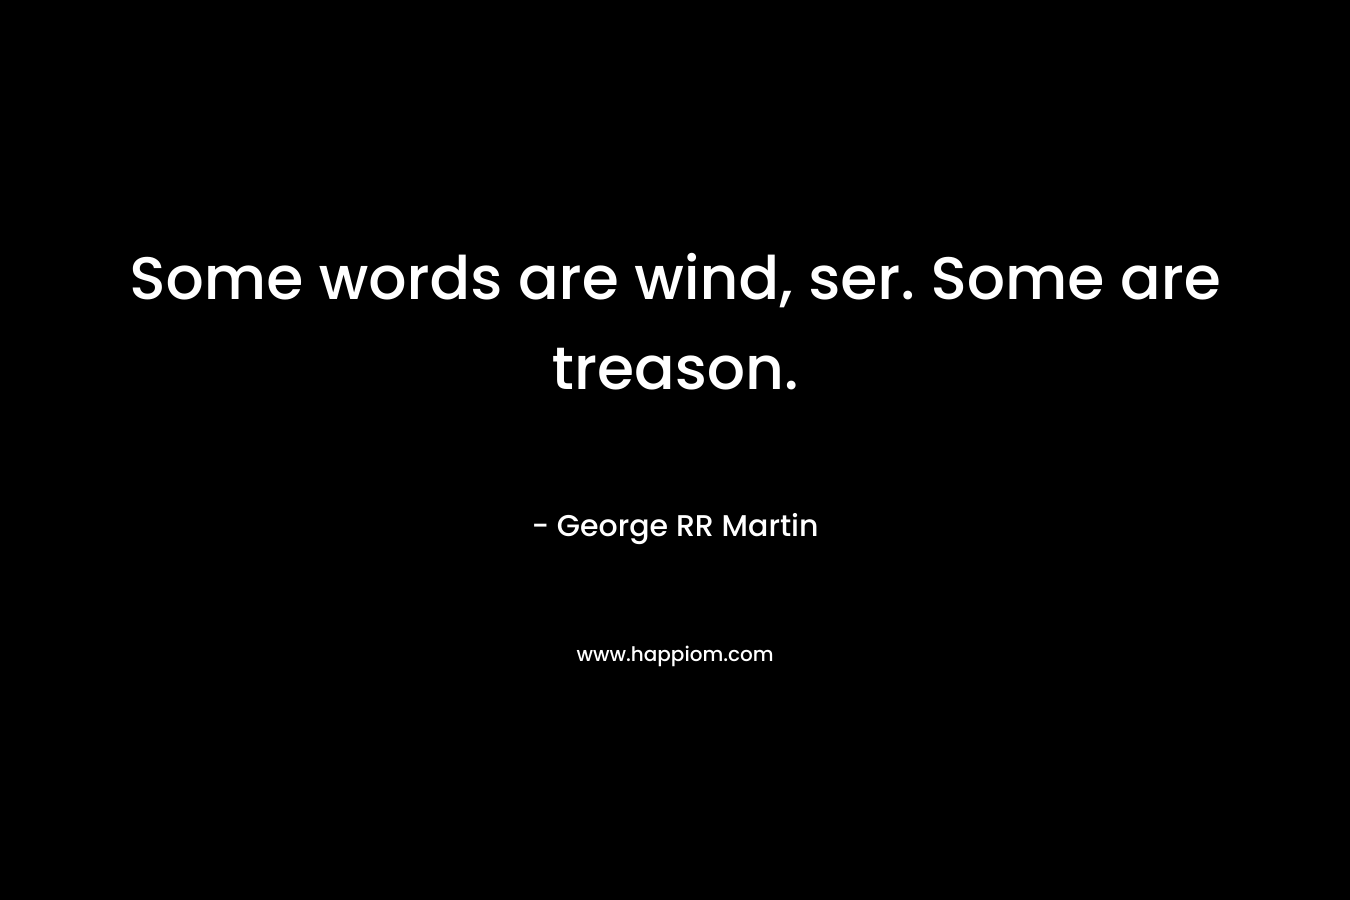 Some words are wind, ser. Some are treason.